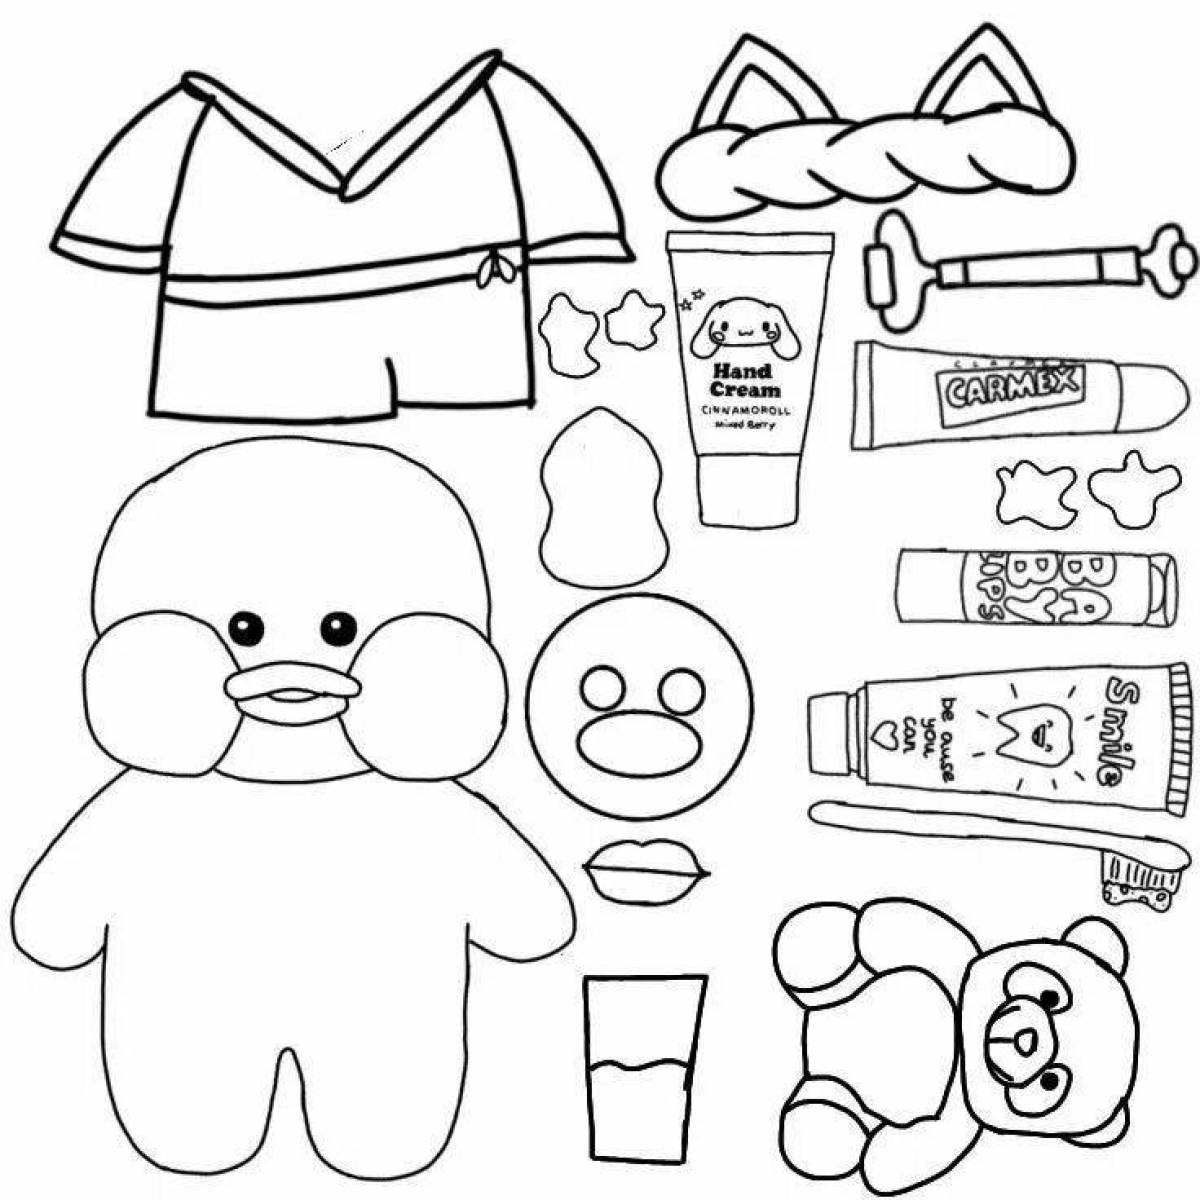 Outrageous dressed duck coloring page